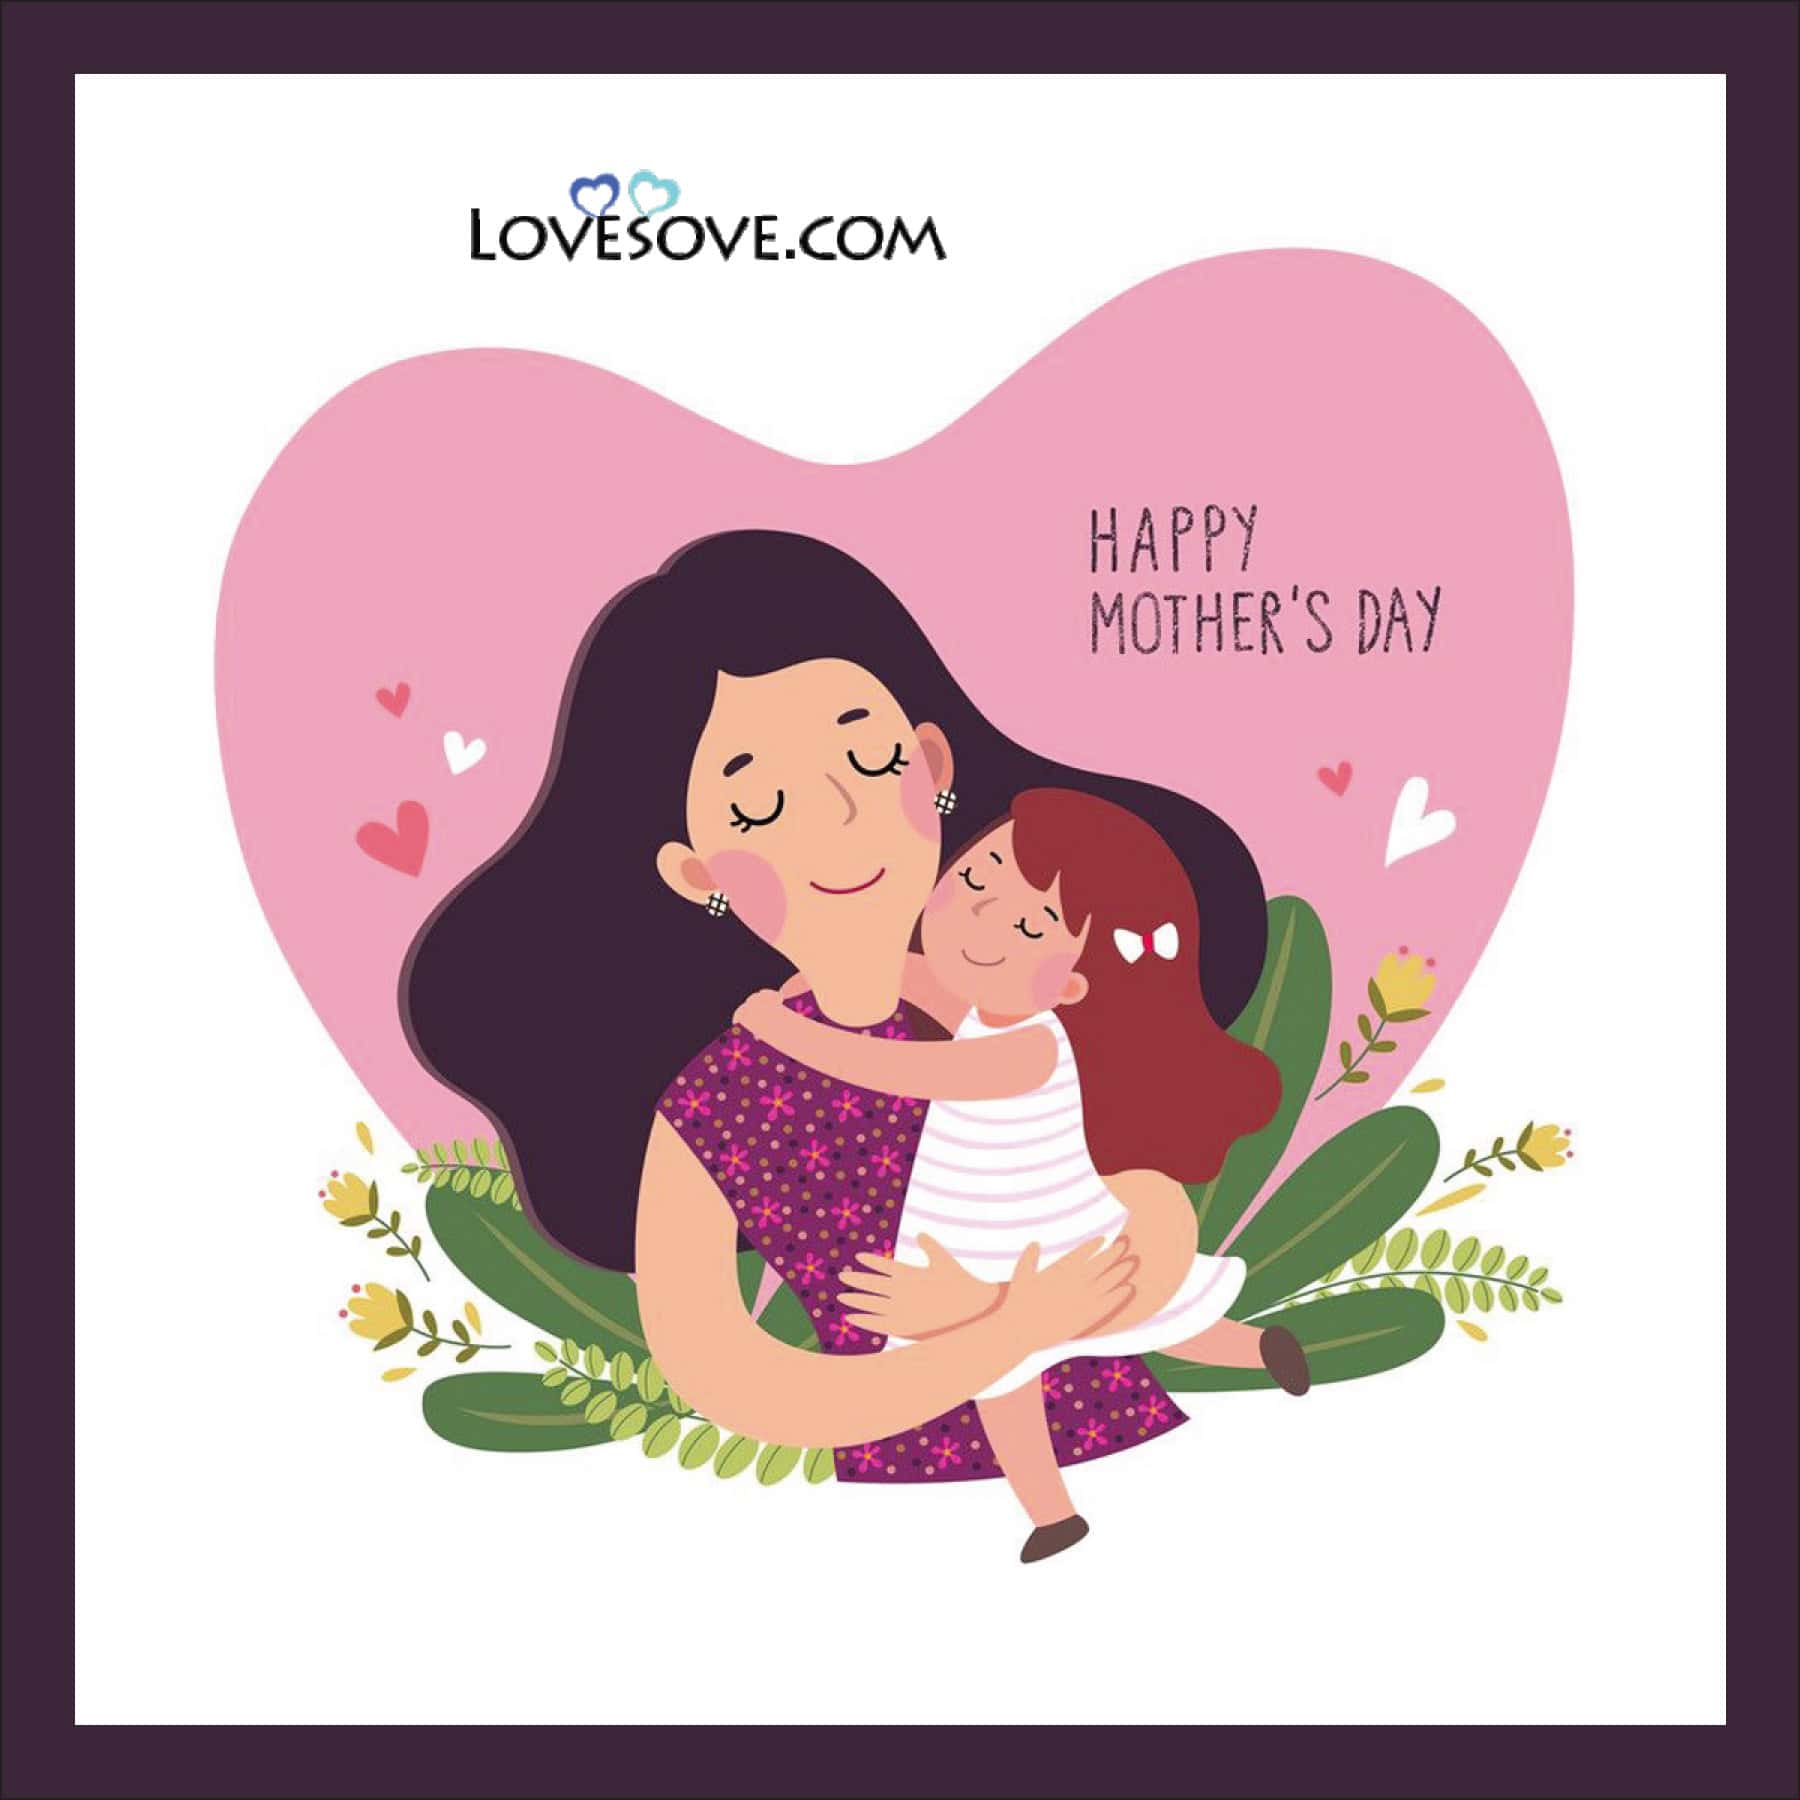 Mothers-Day-Greeting-Lovesove, , mothers day greeting lovesove